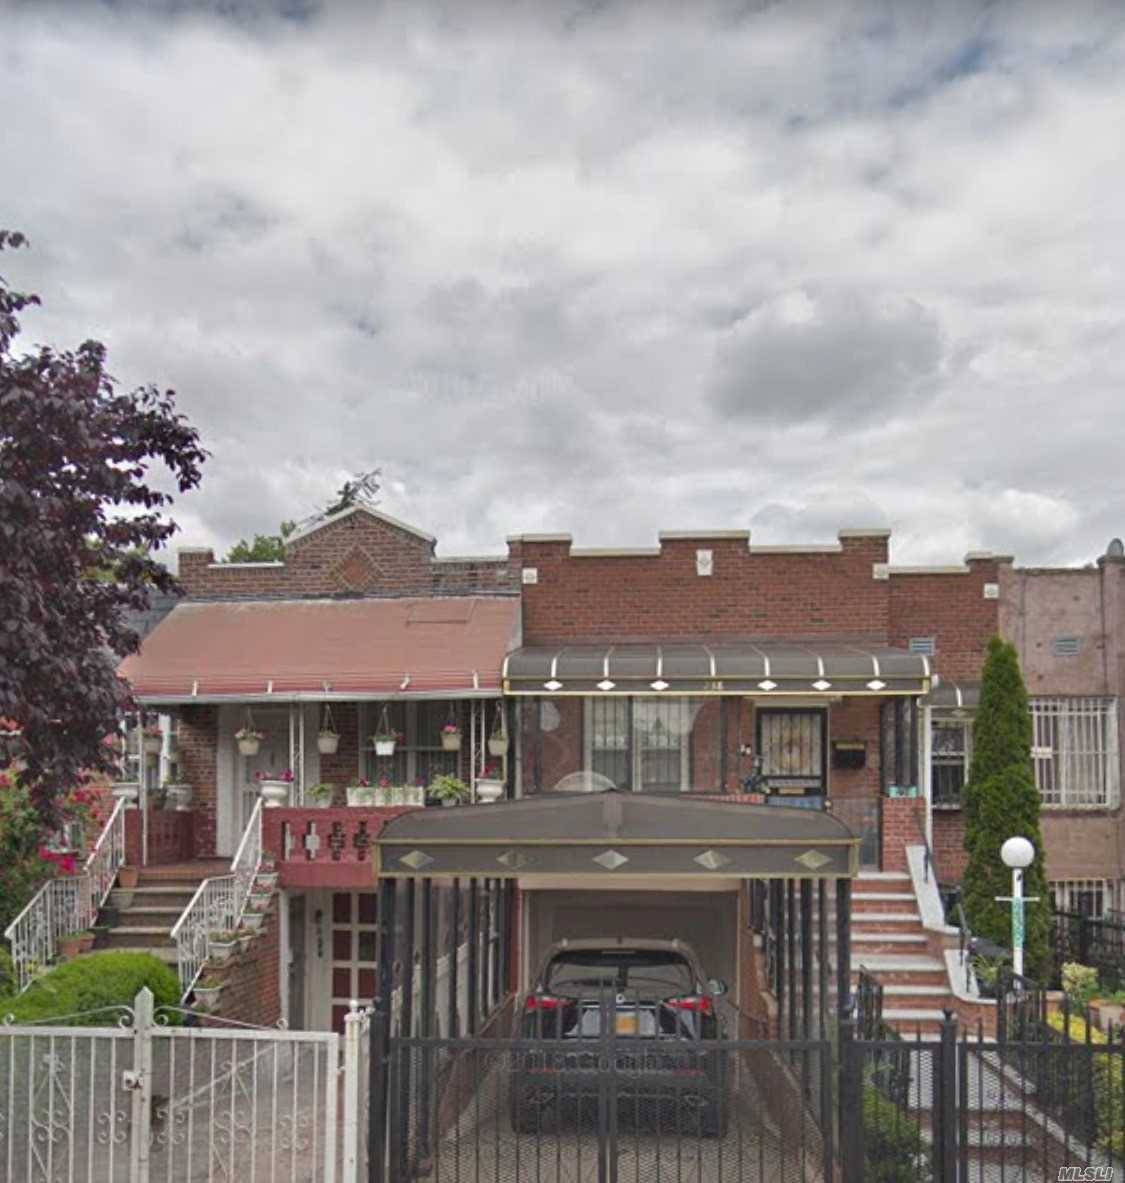 Two Family Attached Brick Townhouse Located In The East Flatbush Section Of Brooklyn.